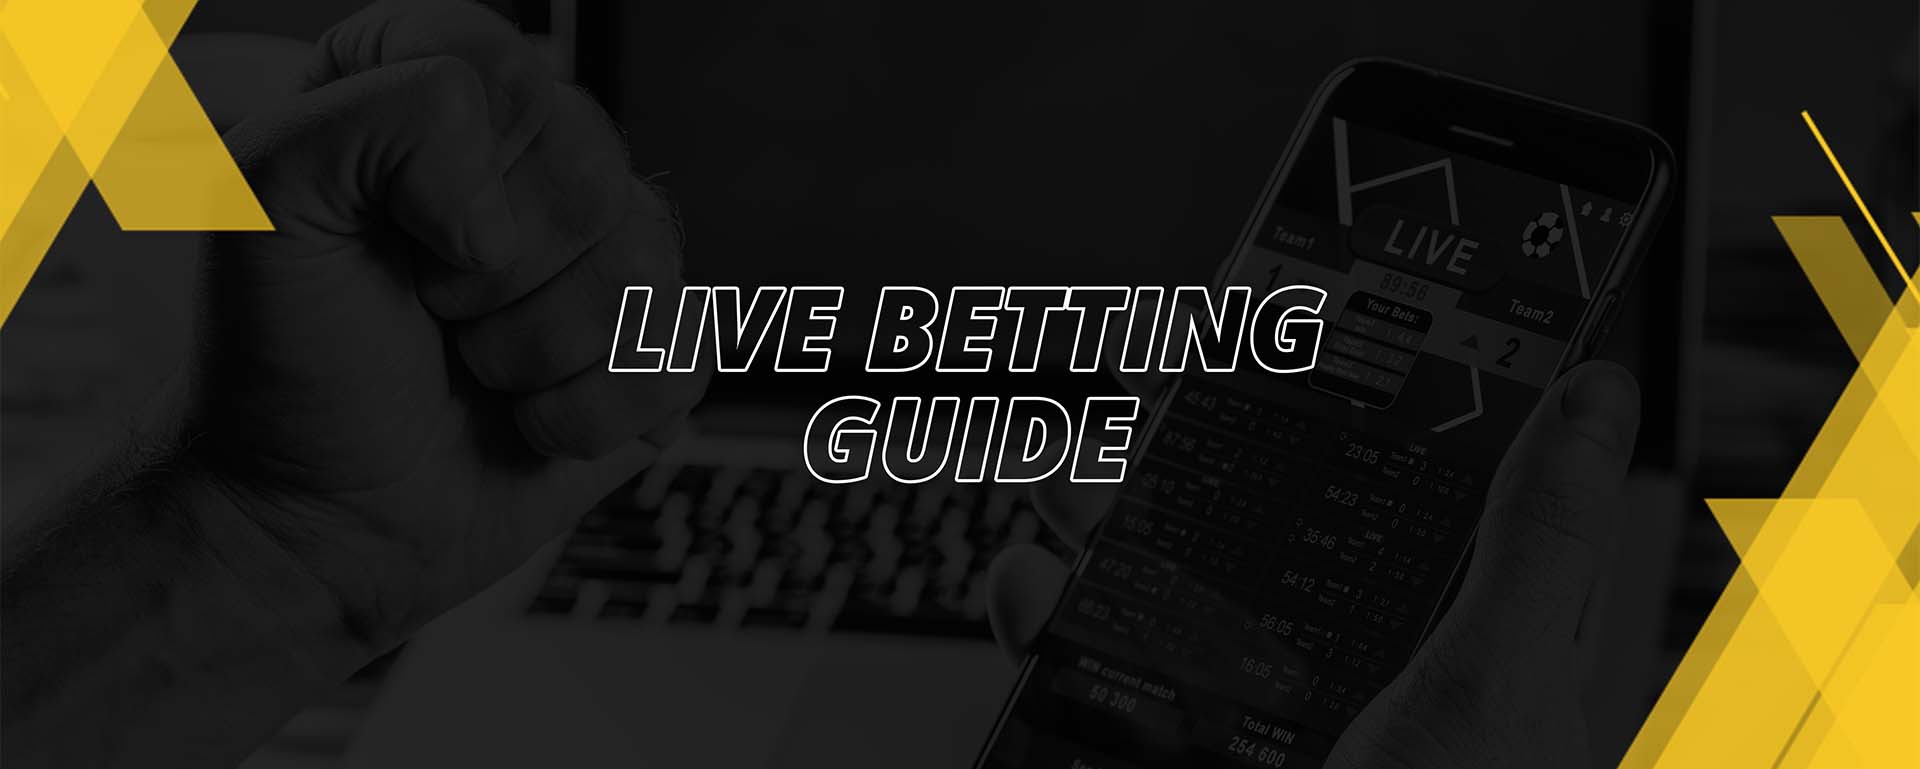 LIVE BETTING GUIDE